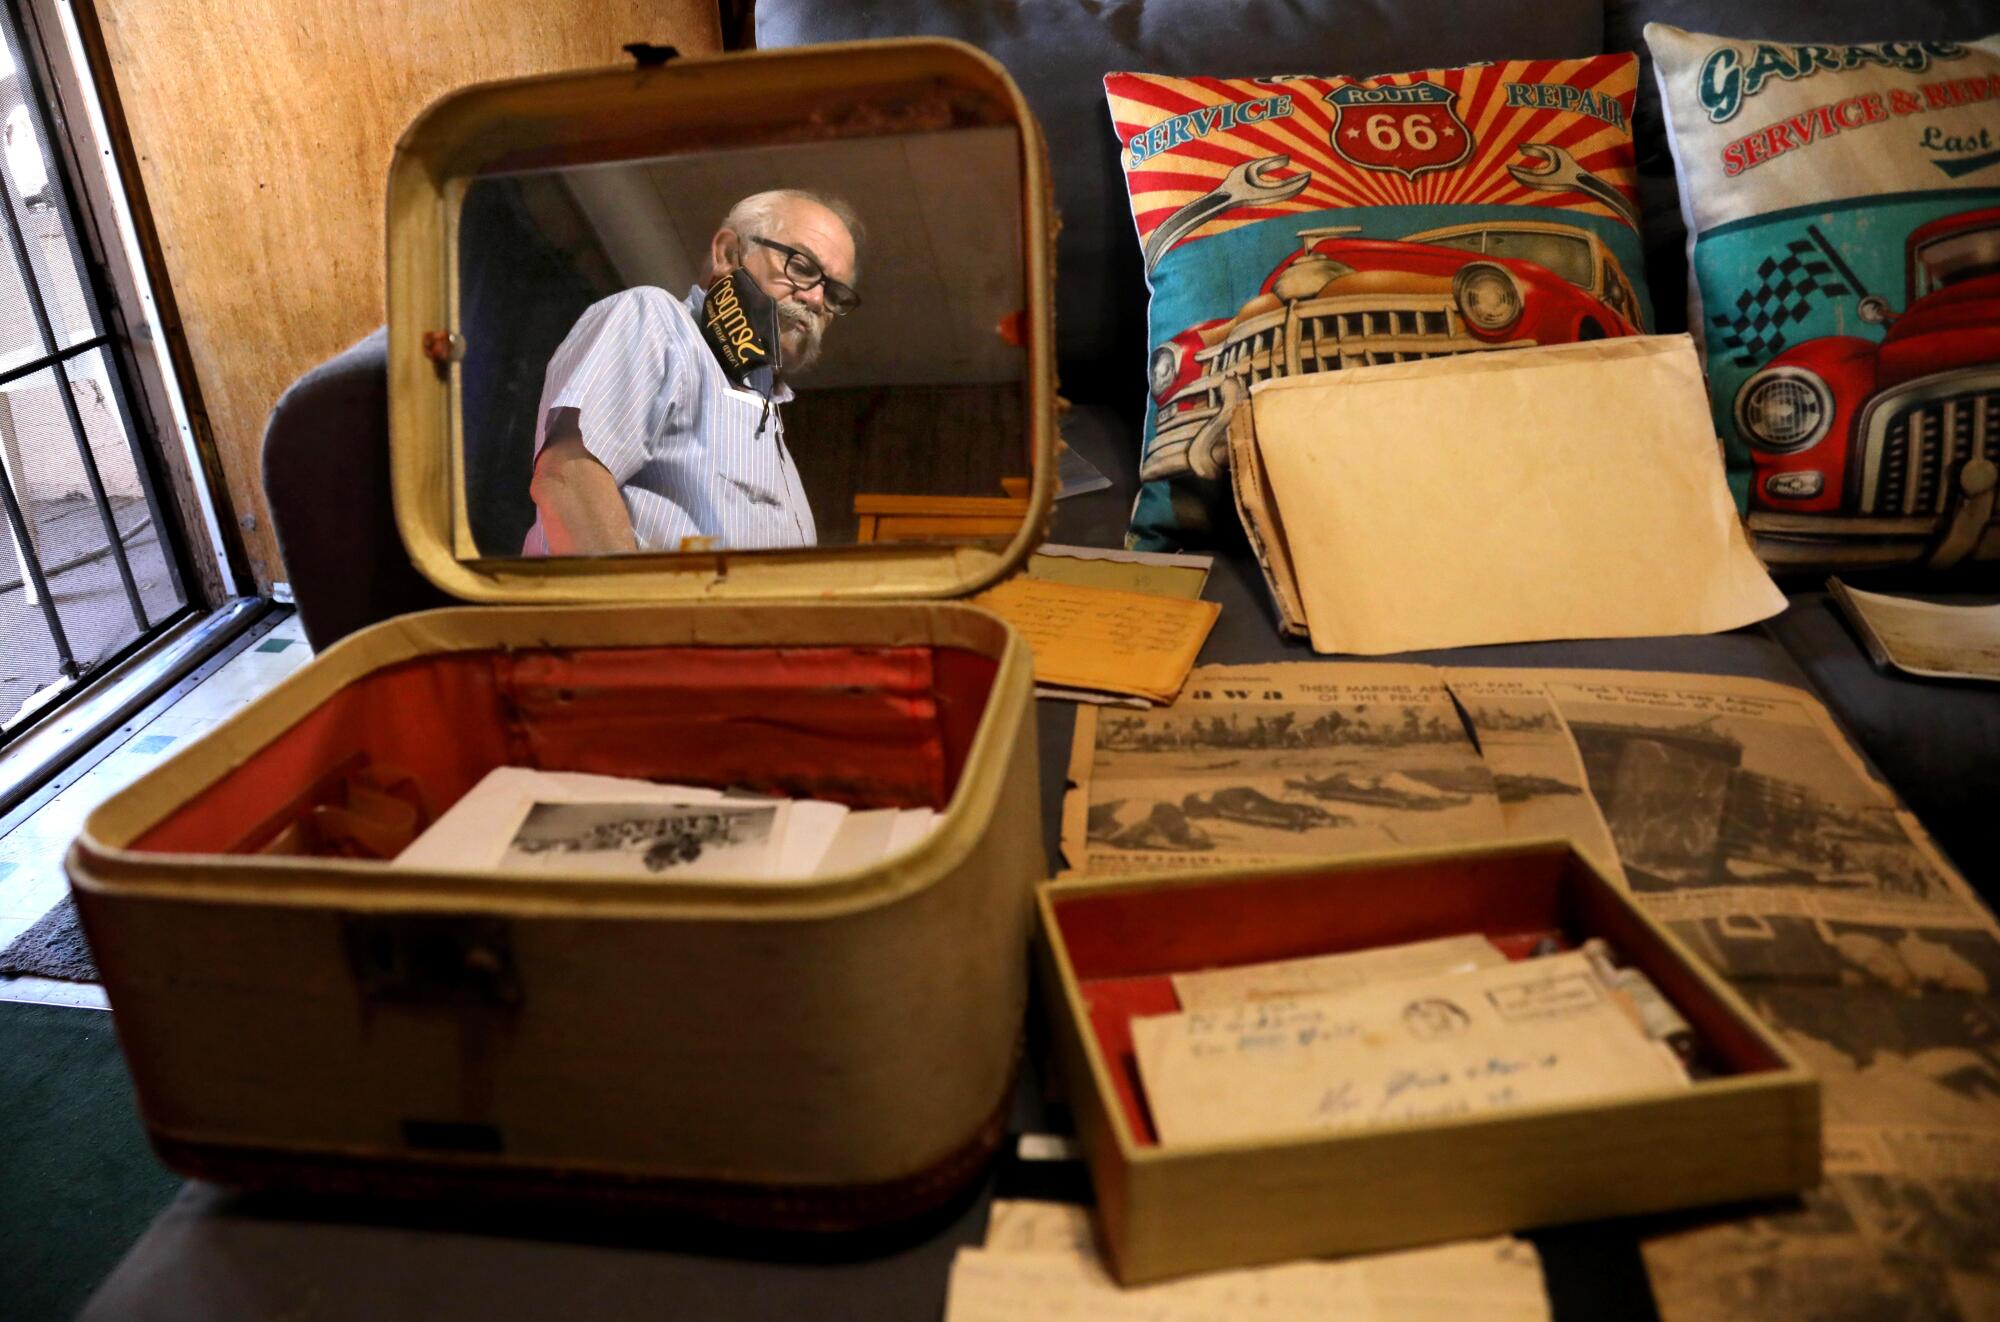 Isaac Cruz III is reflected in a mirror of a cosmetic case that contains letters and memorabilia from his uncle Jacob Cruz.